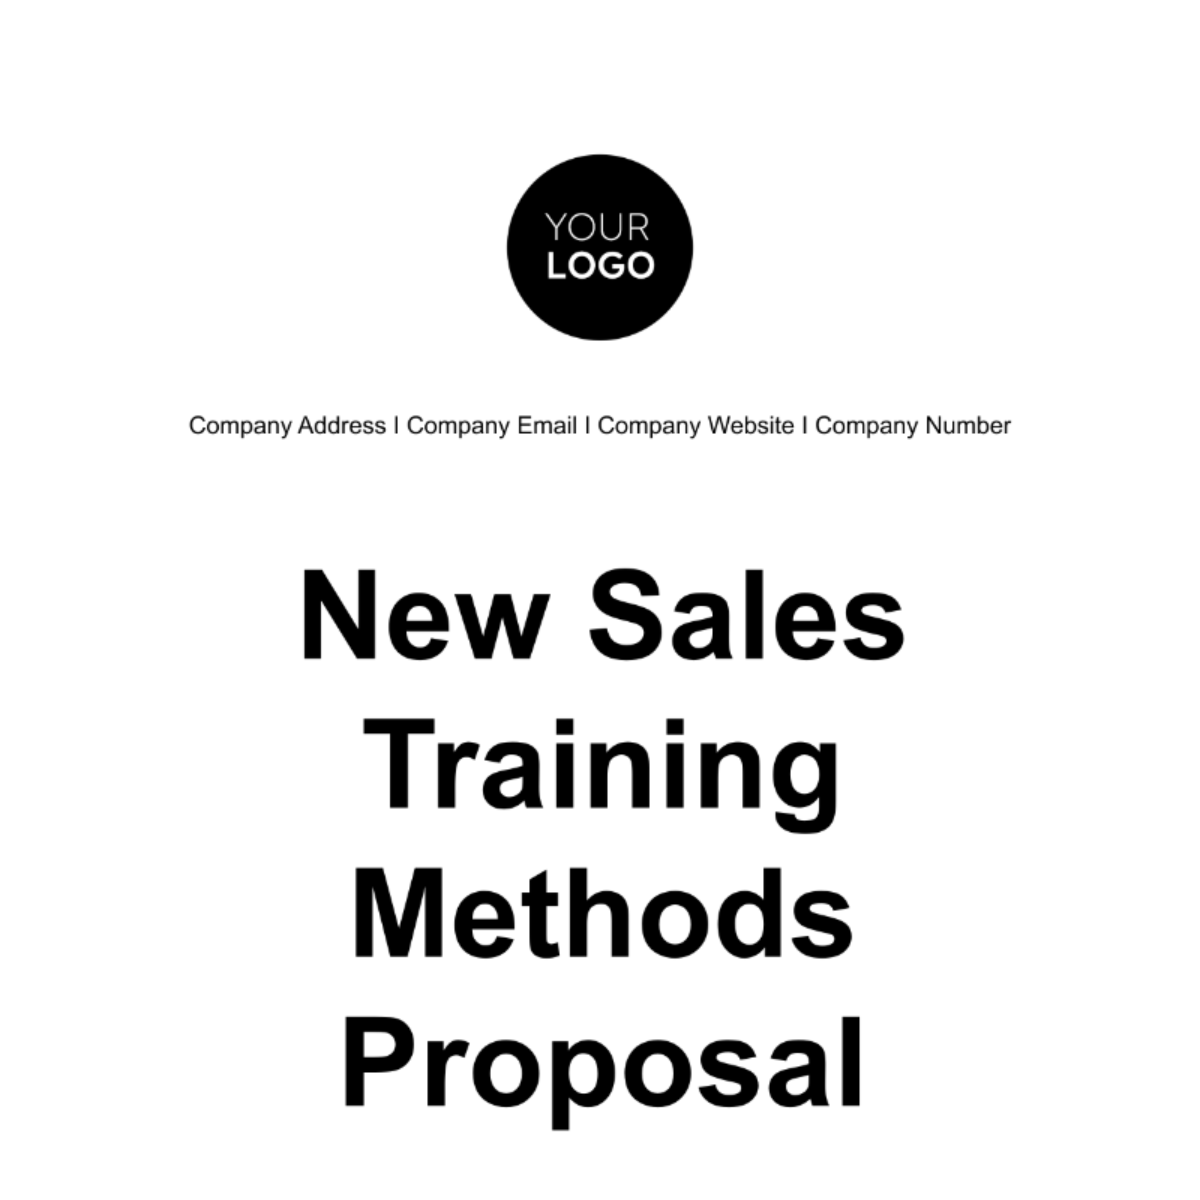 Free New Sales Training Methods Proposal Template